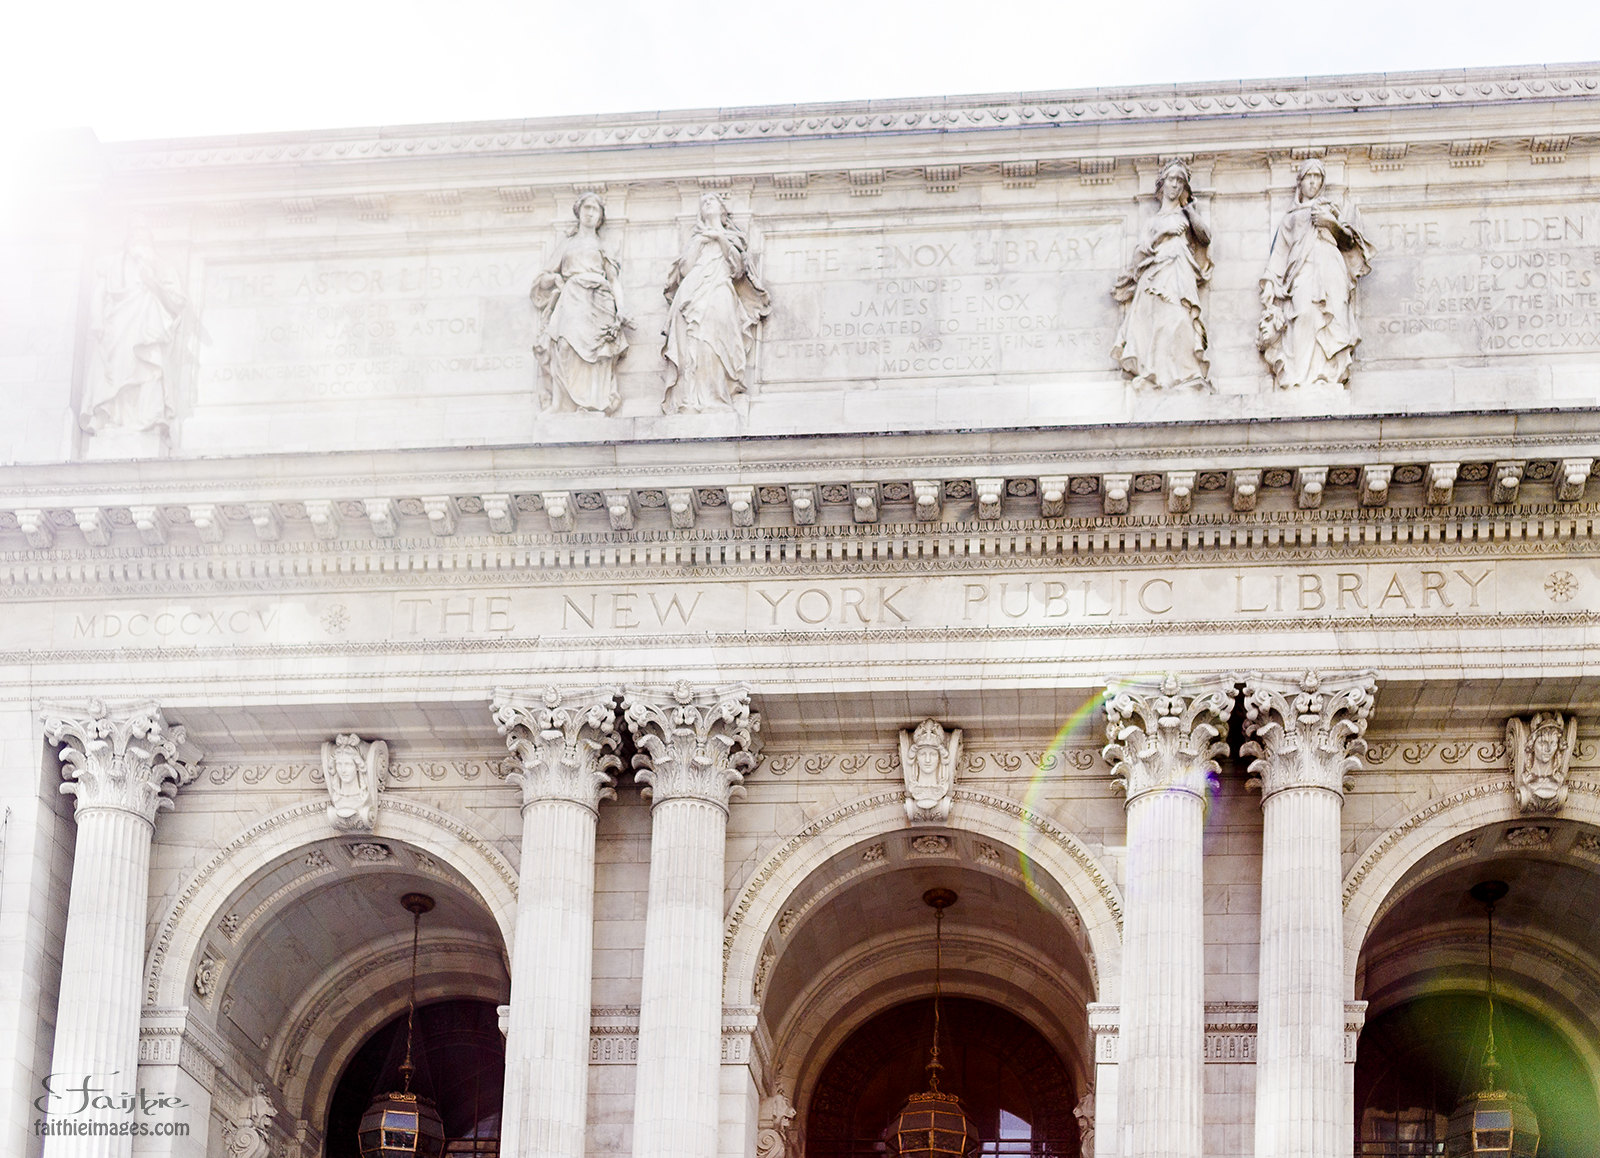 THe beautiful architecture of NY's public library